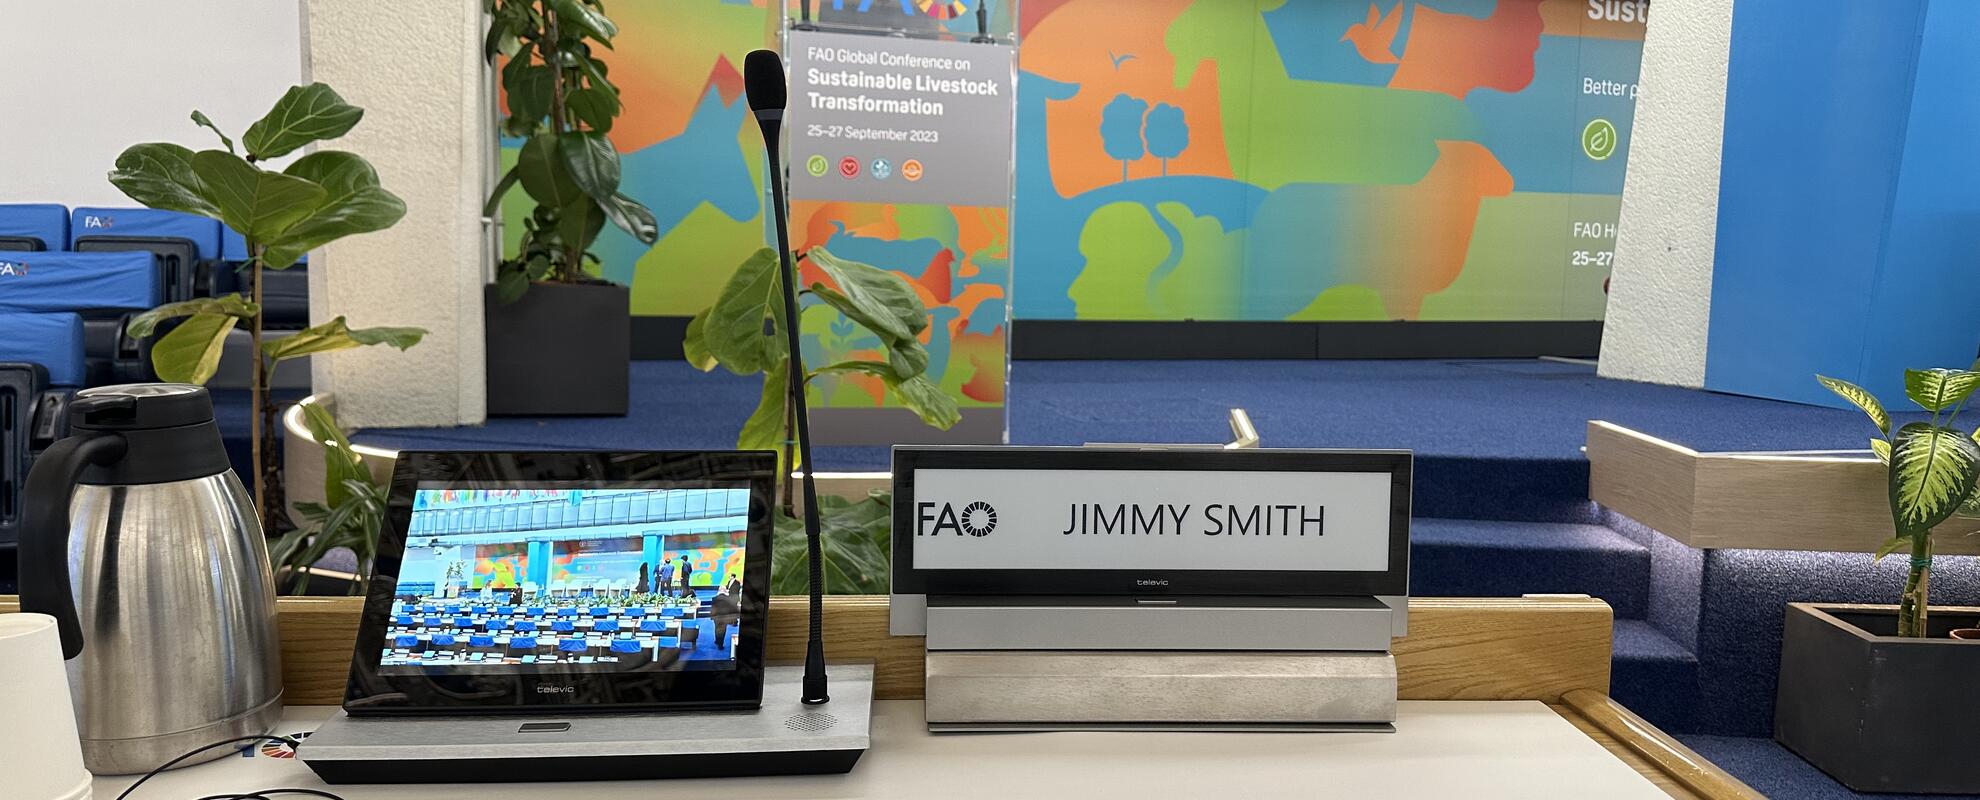 Jimmy Smith's seat at the FAO conference